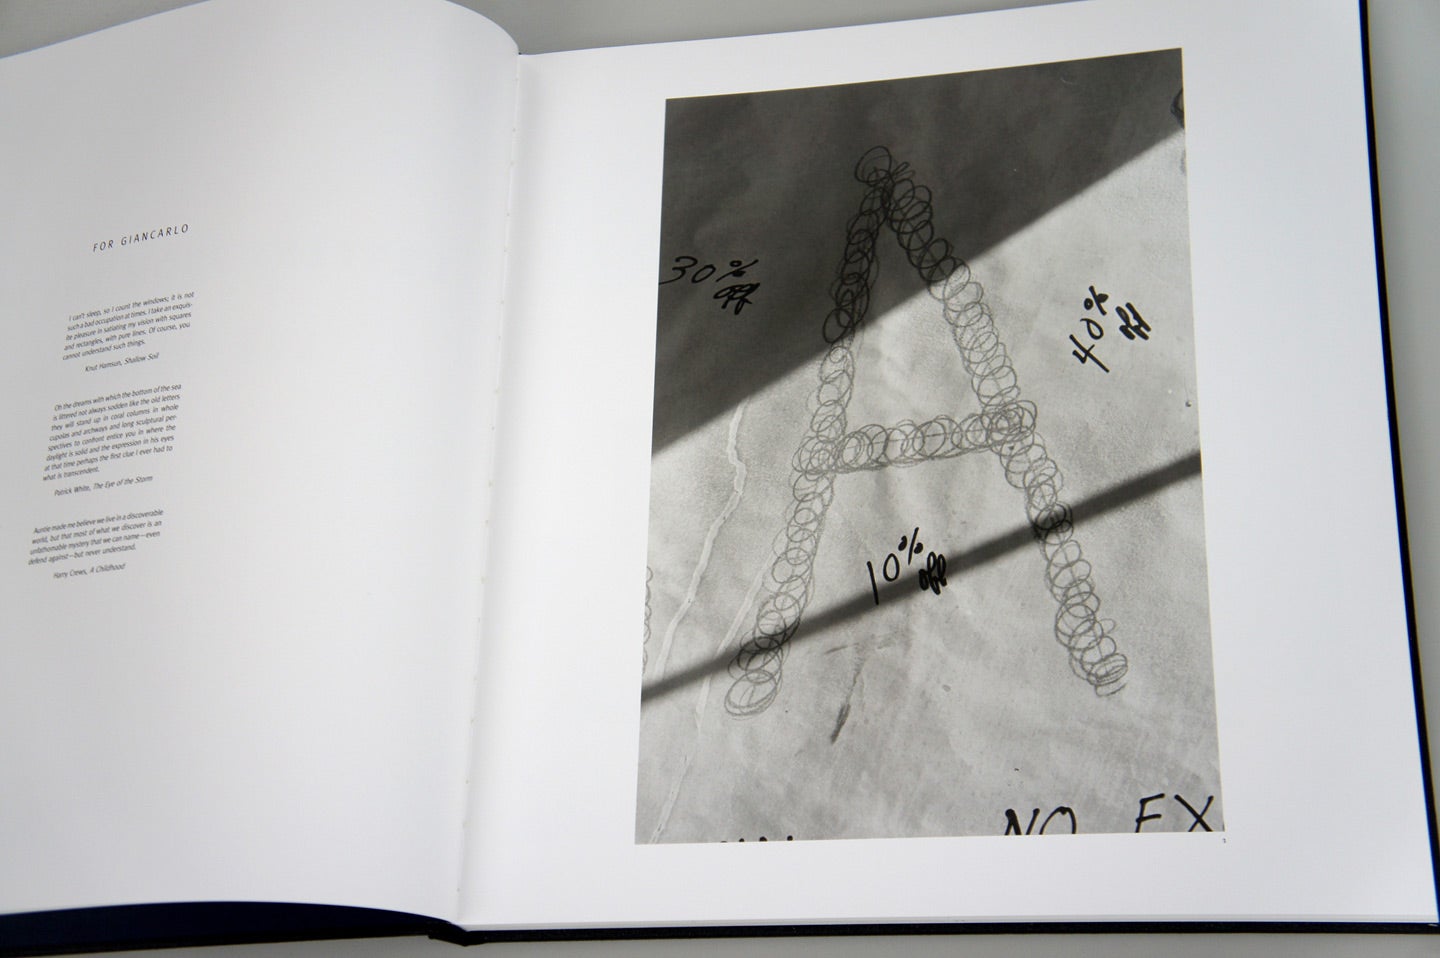 Lee Friedlander: Letters from the People (Special Limited Edition with One Vintage Gelatin Silver Print: "8")